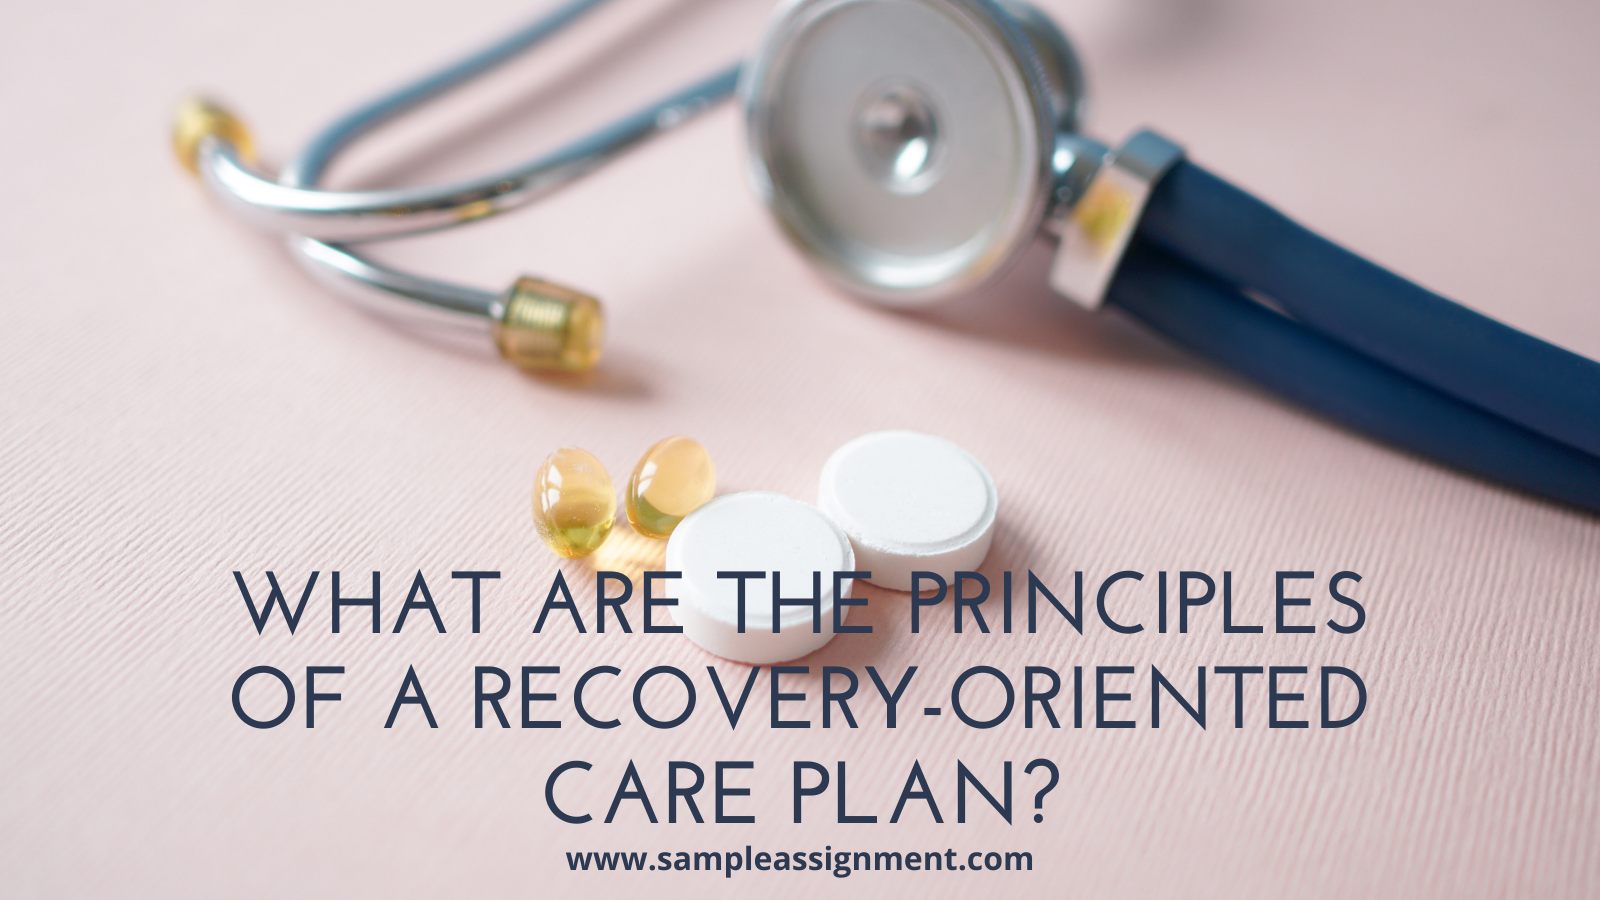 What are the Principles of a recovery oriented care plan